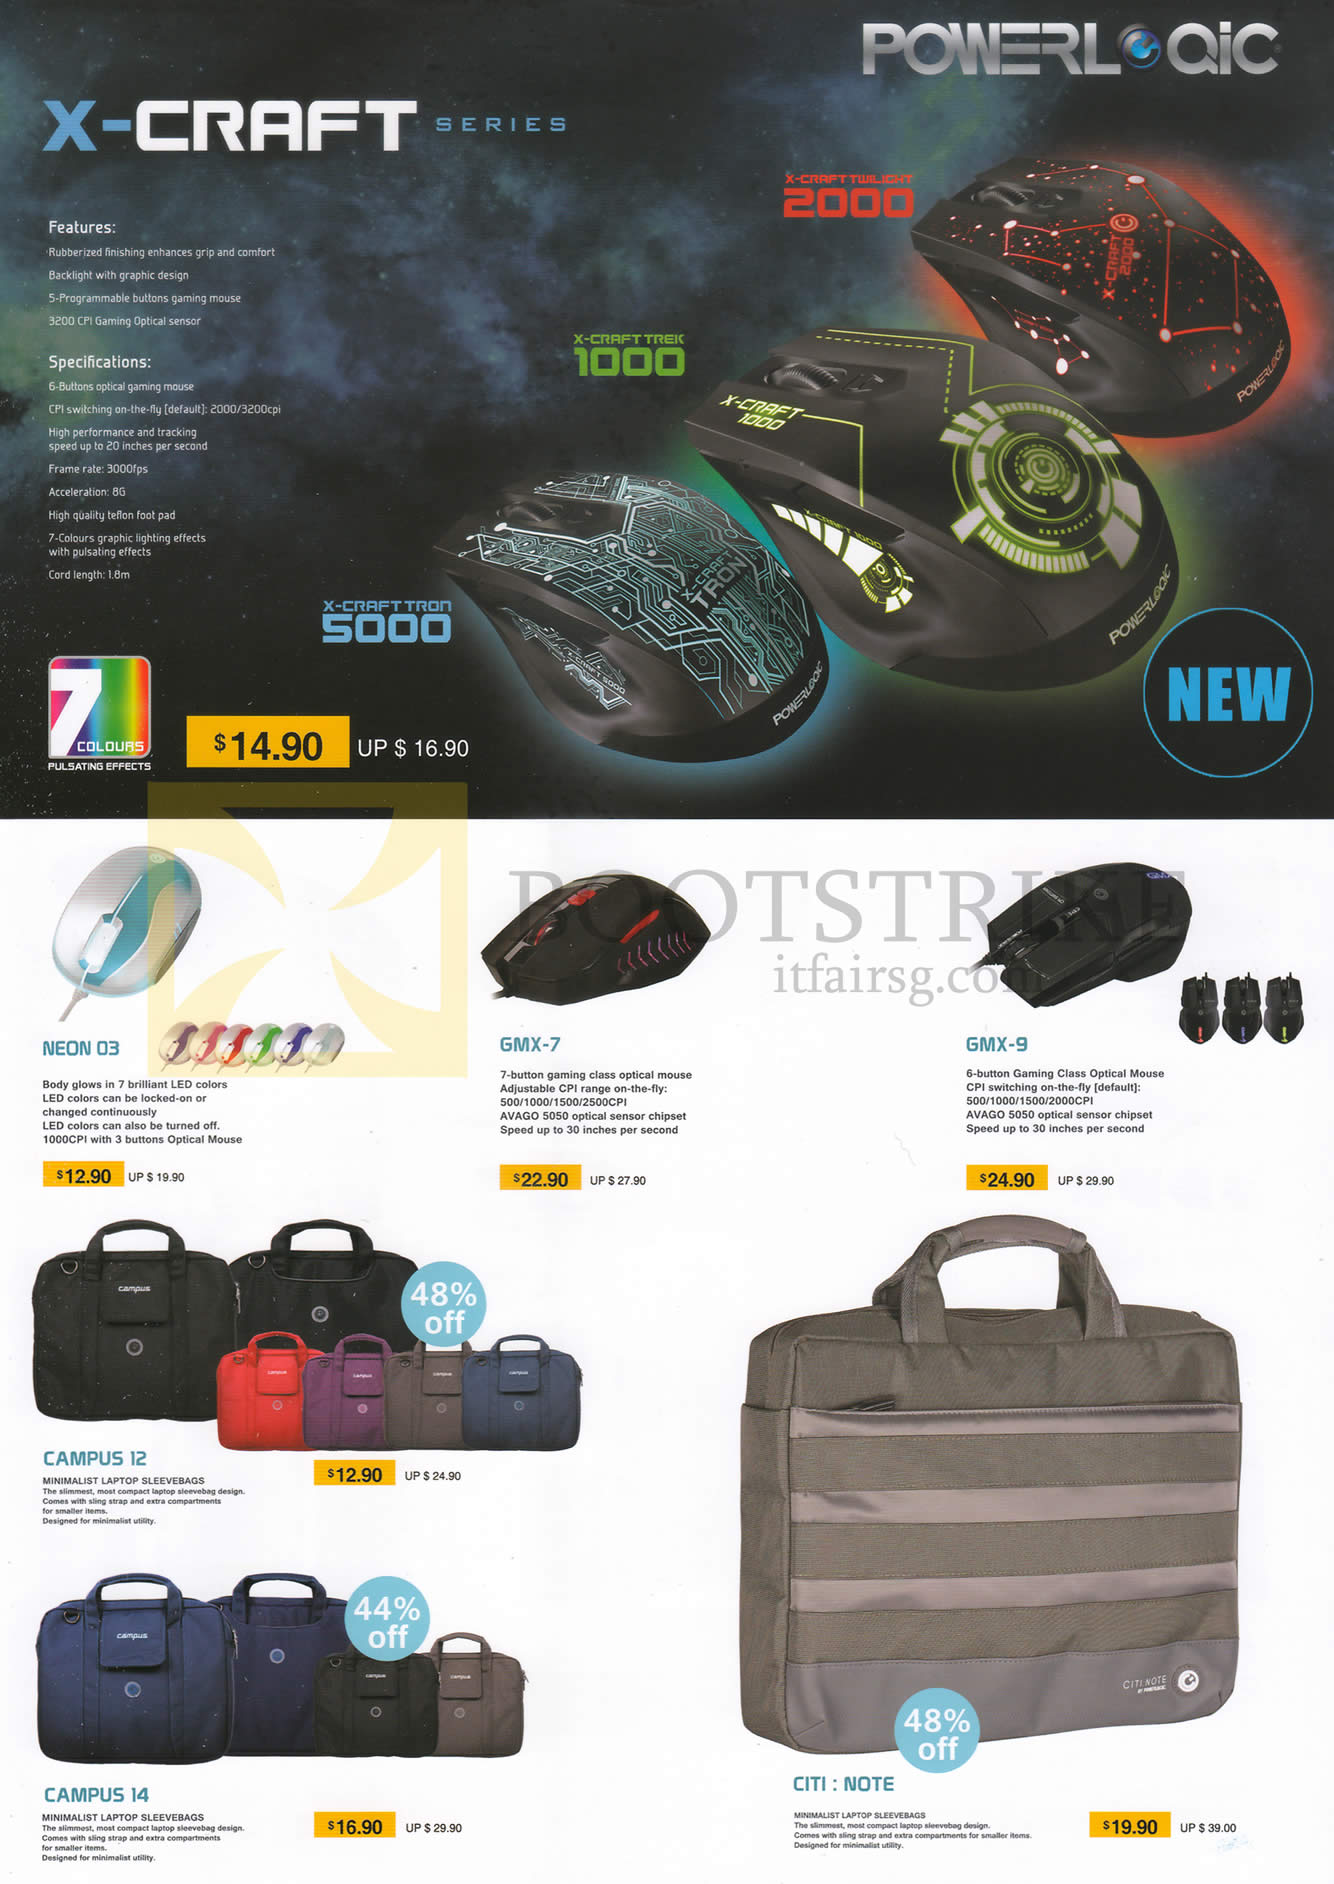 COMEX 2014 price list image brochure of SonicGear Powerlogic Mouse, Laptop, Tablet Bags, X-Craft, Neon 03, GMX-7, GMX-9, Campus 12, Campus 14, Citi Note